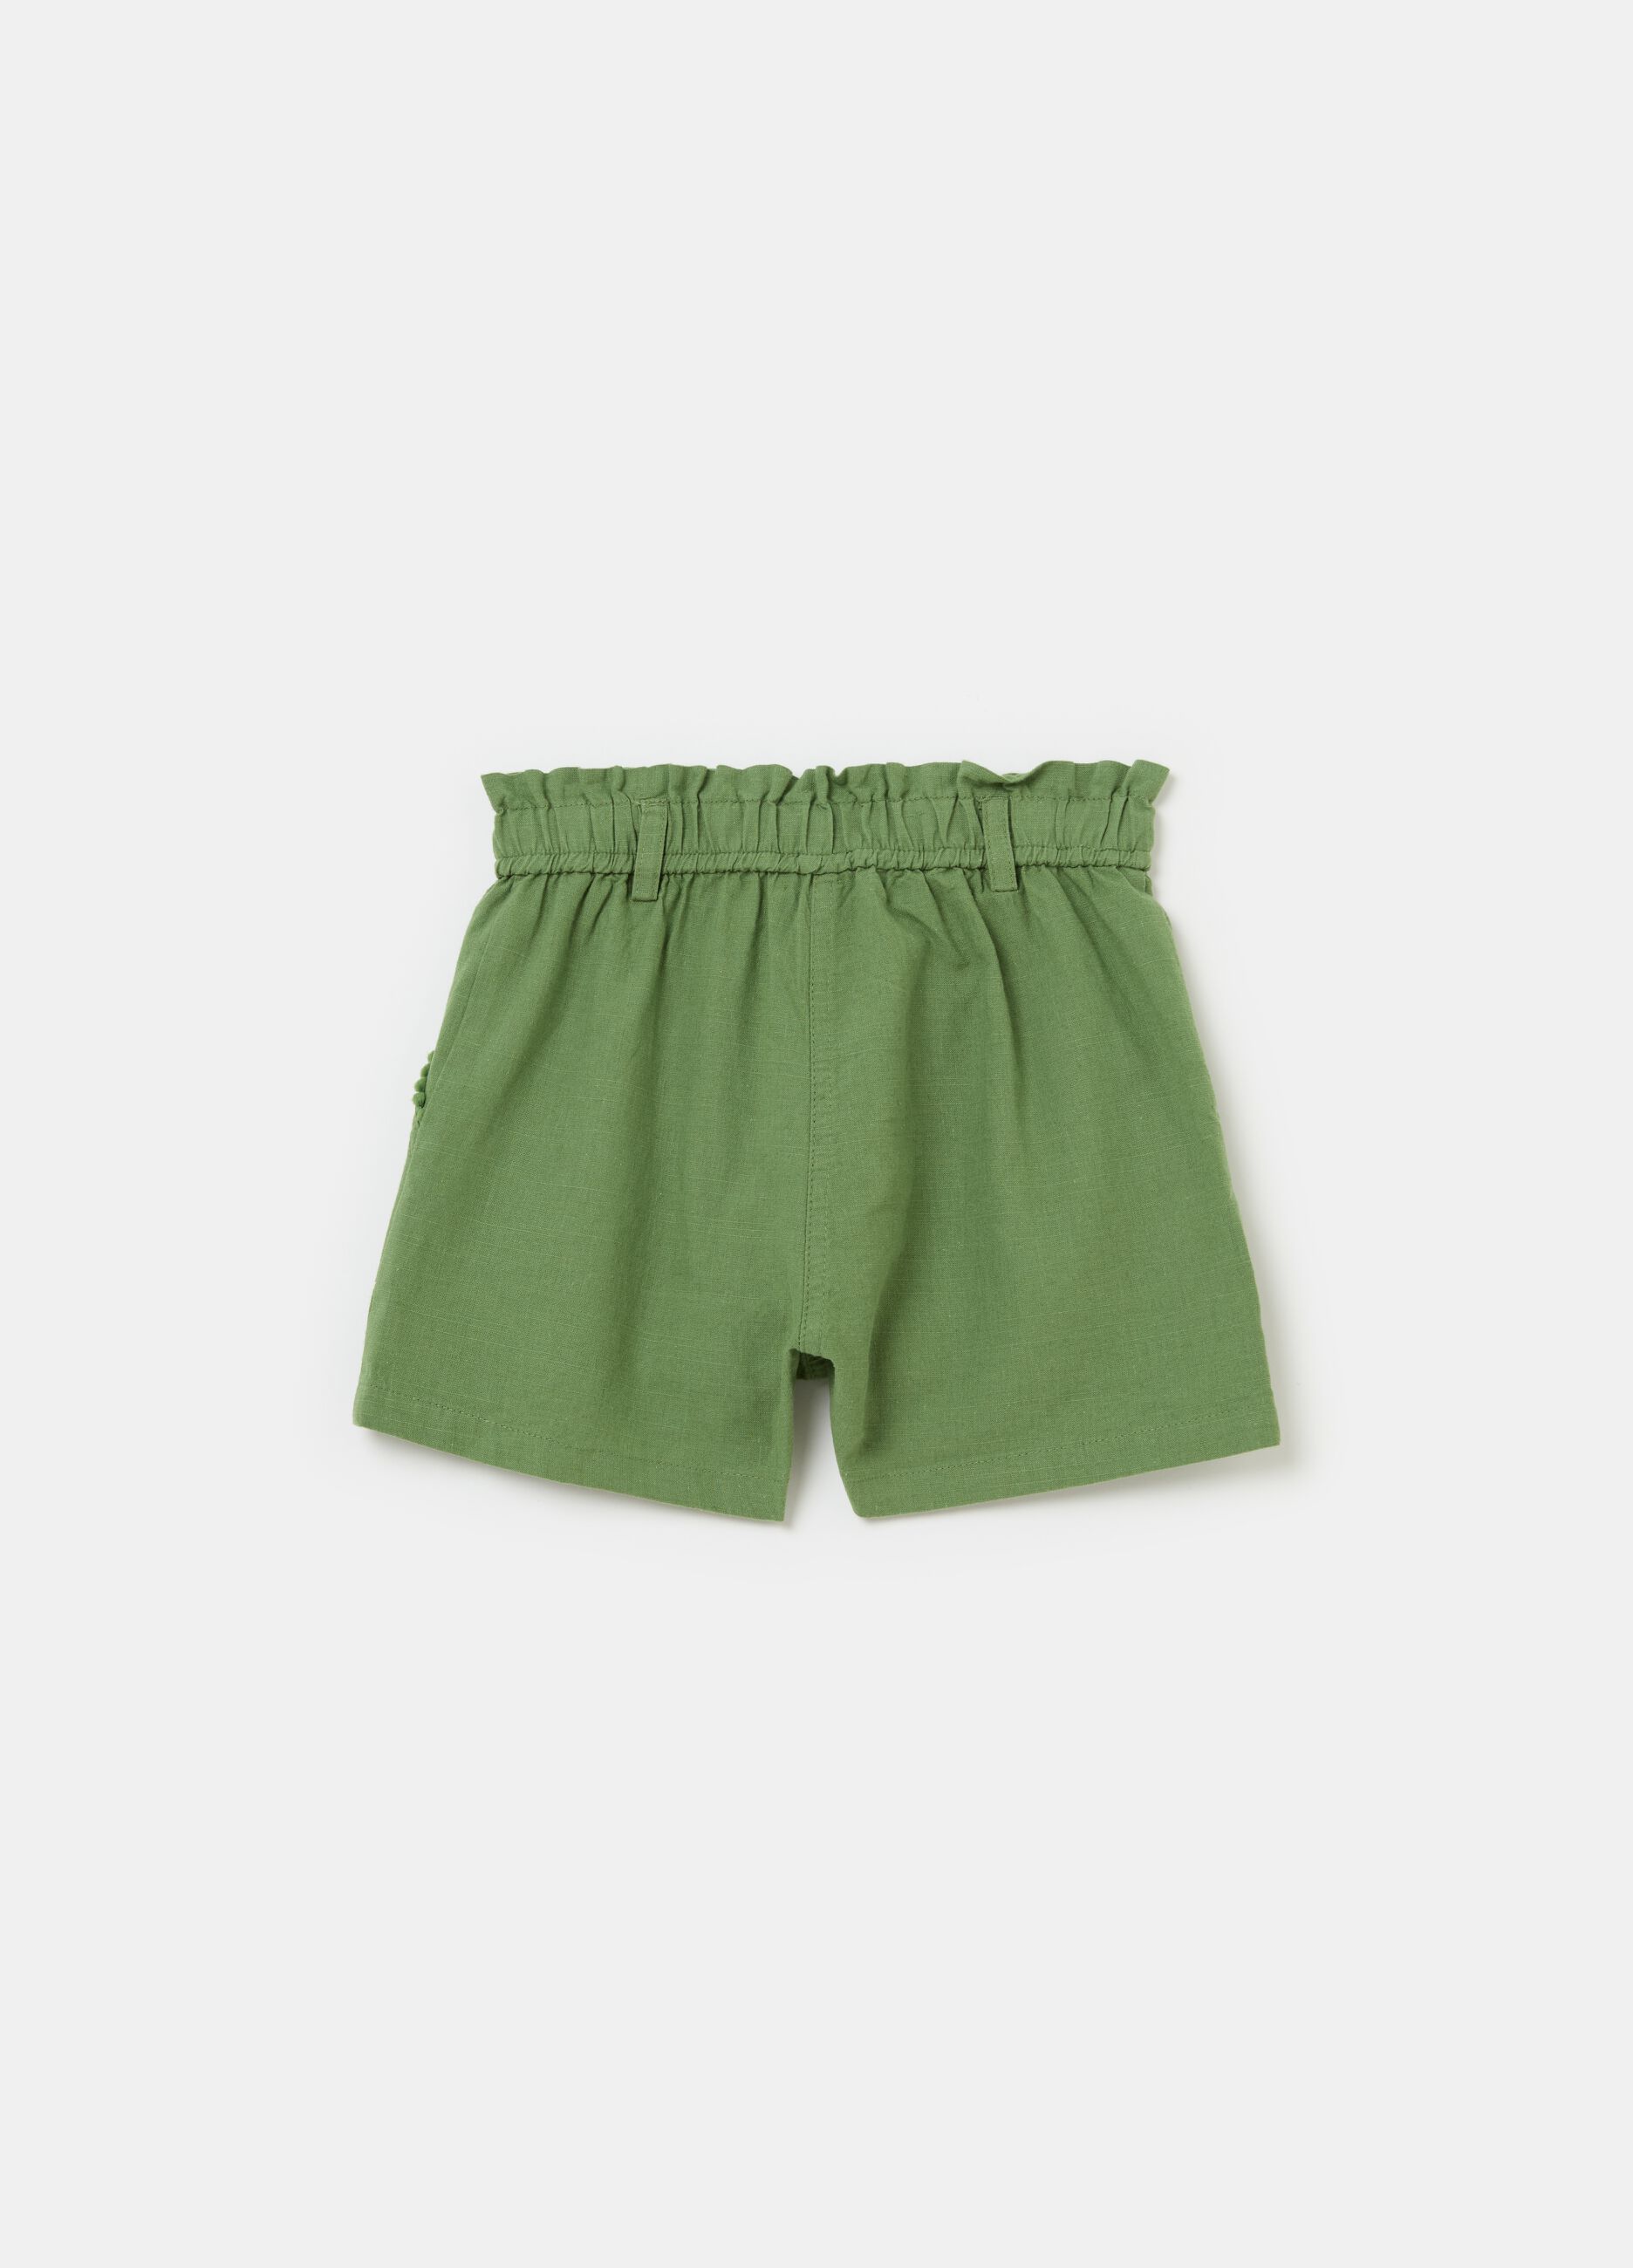 Paper bag shorts with ethnic trim